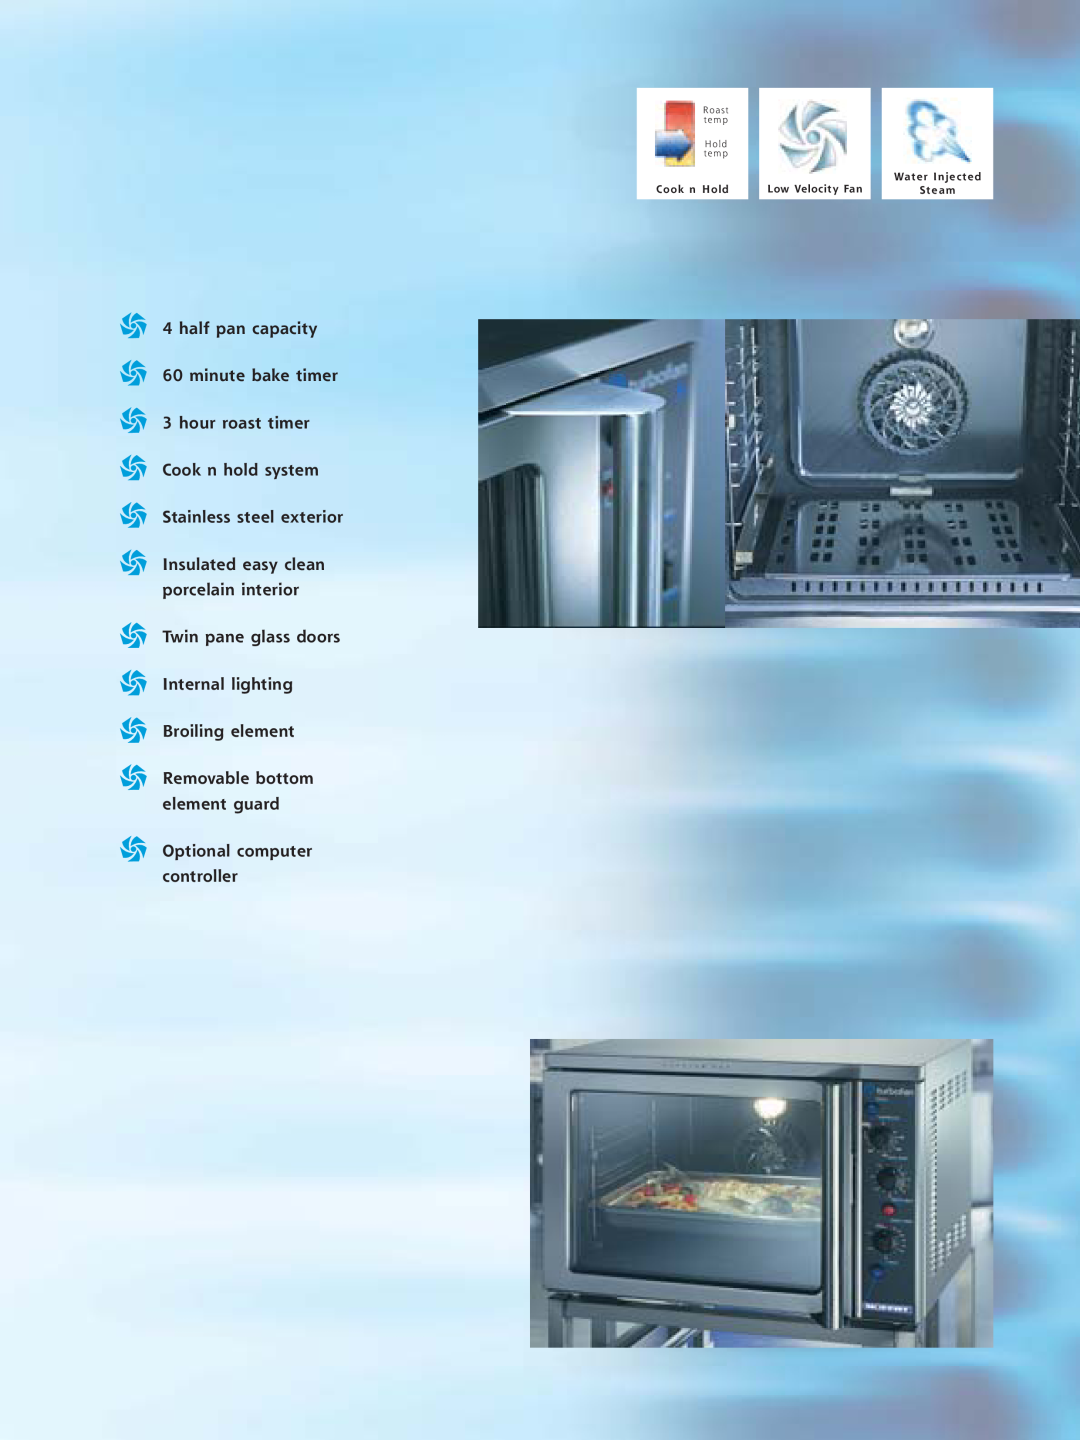 Moffat E25 manual Cook n Hold, Low Velocity Fan, Water Injected, Steam, H o l d t e m p, R o a s t t e m p 